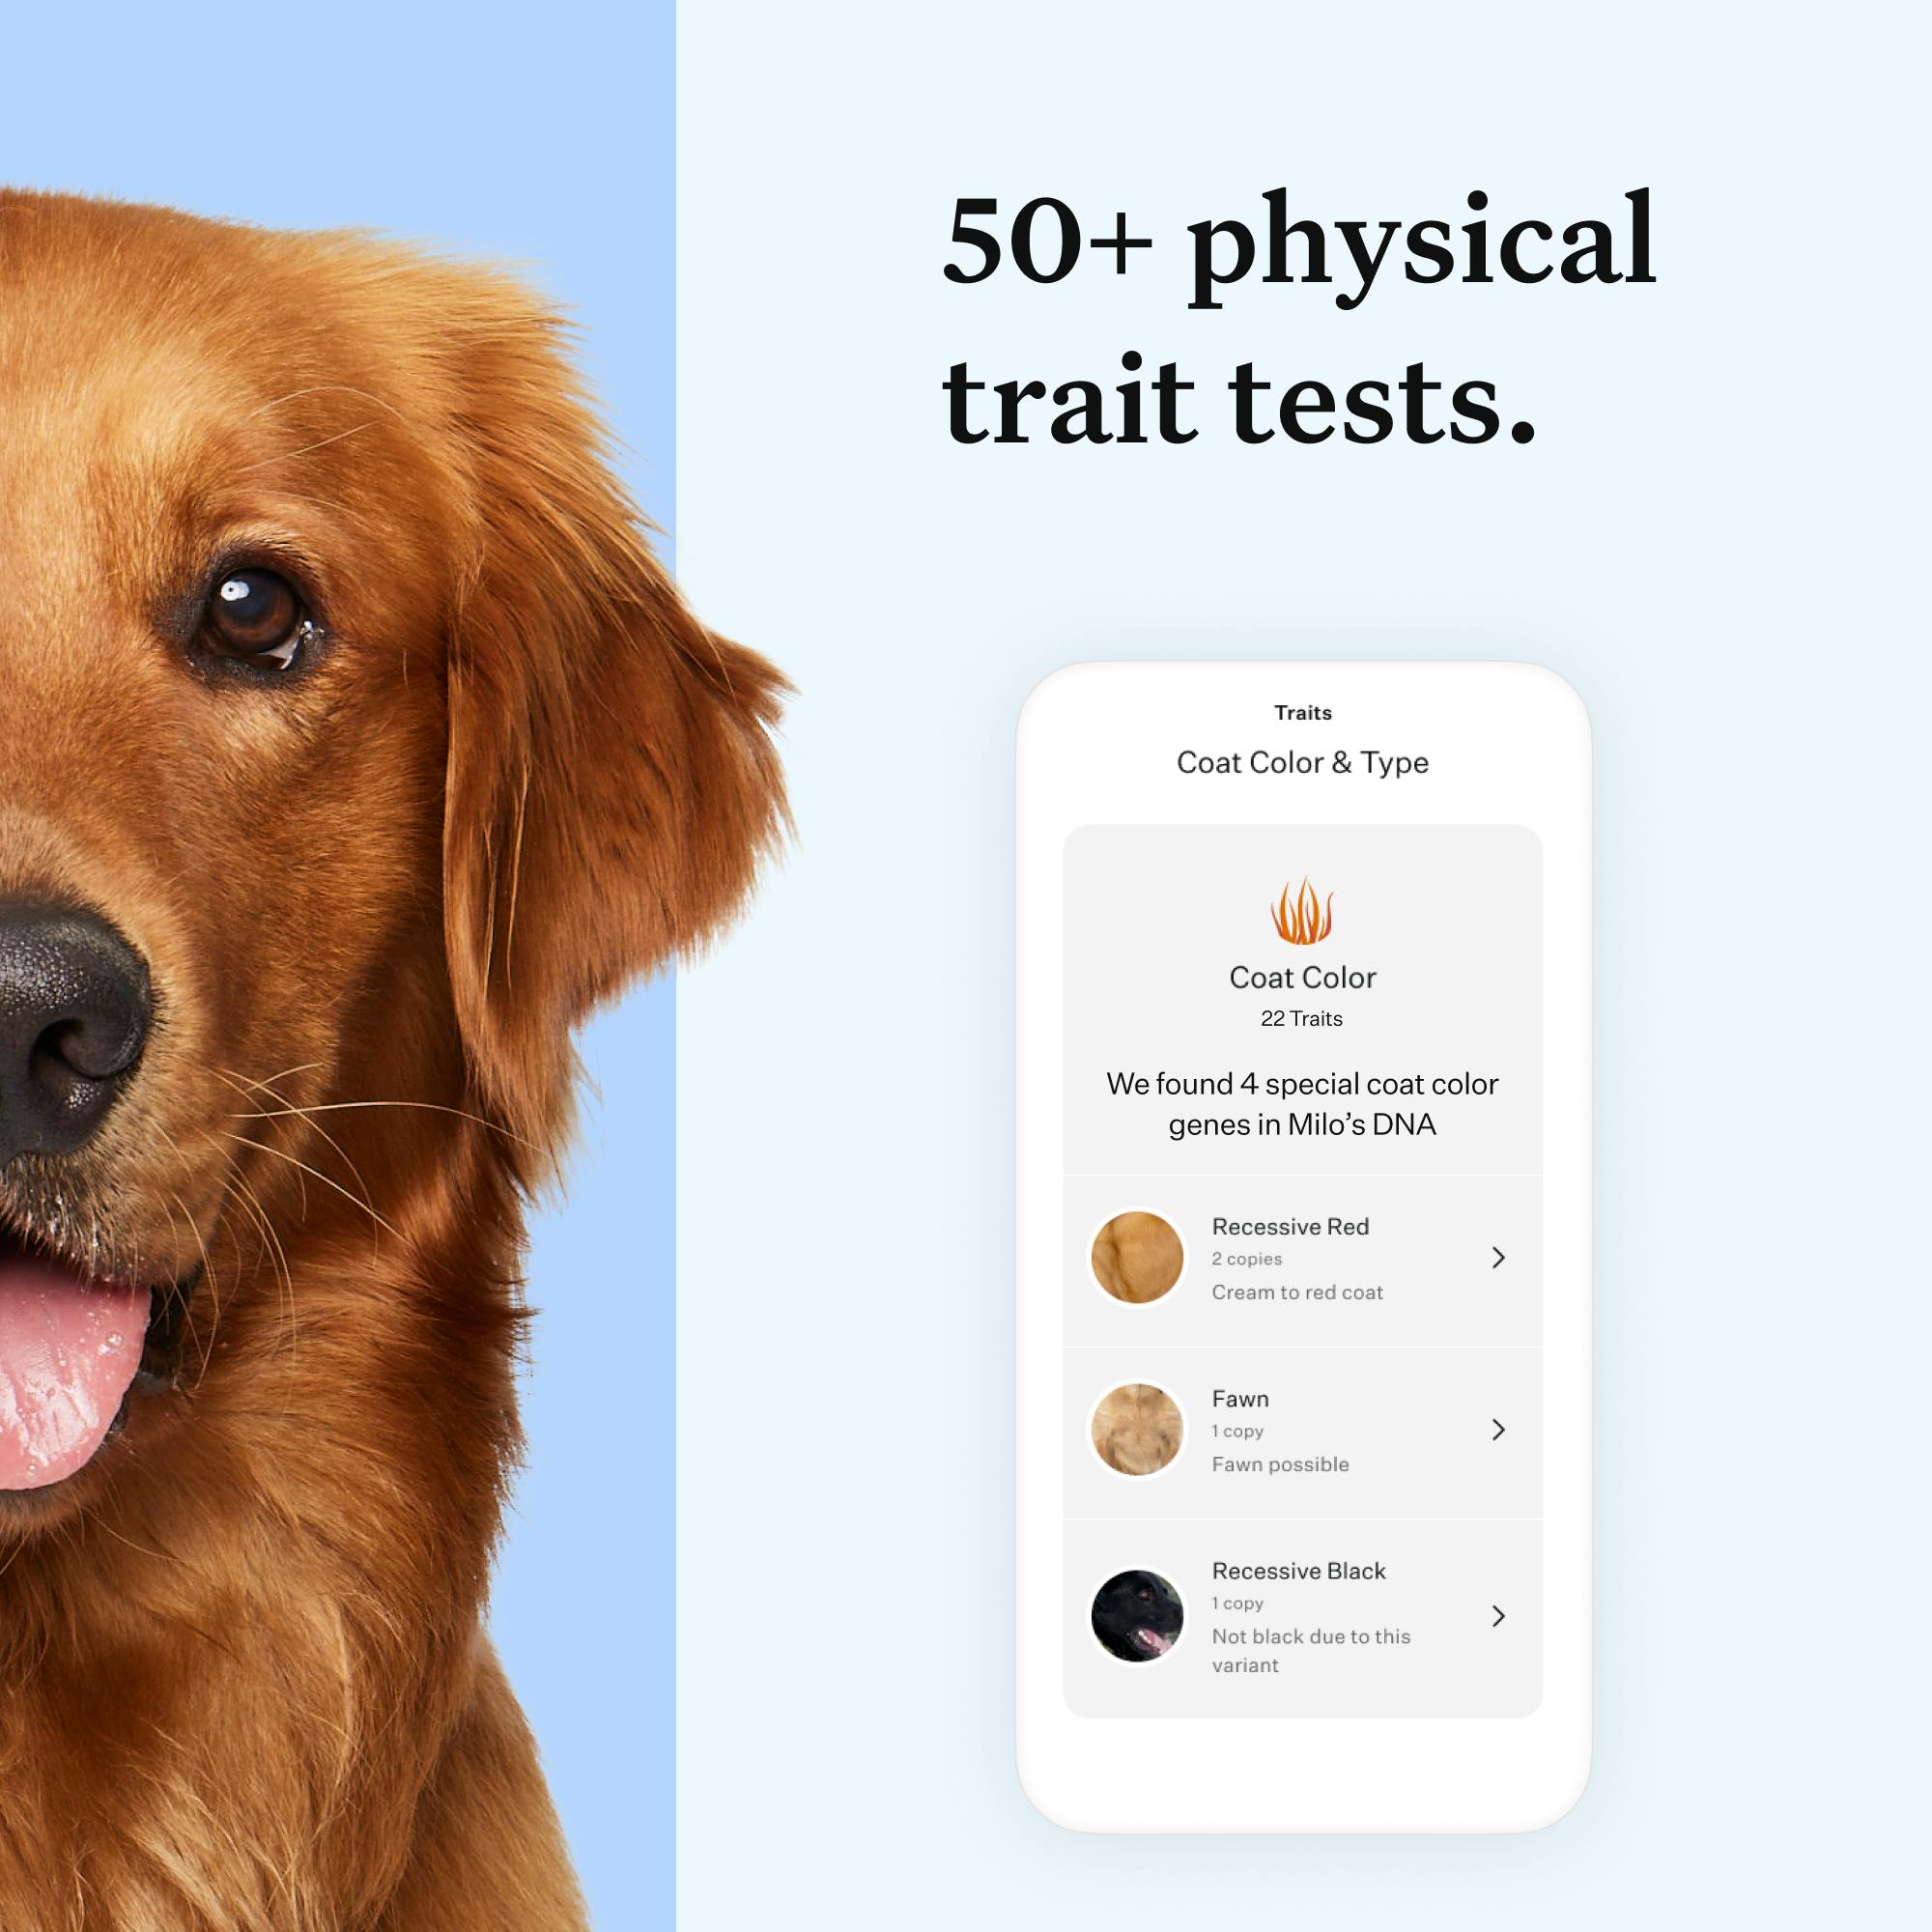 Screenshot from Wisdom Panel report | 50+ physical trait tests.